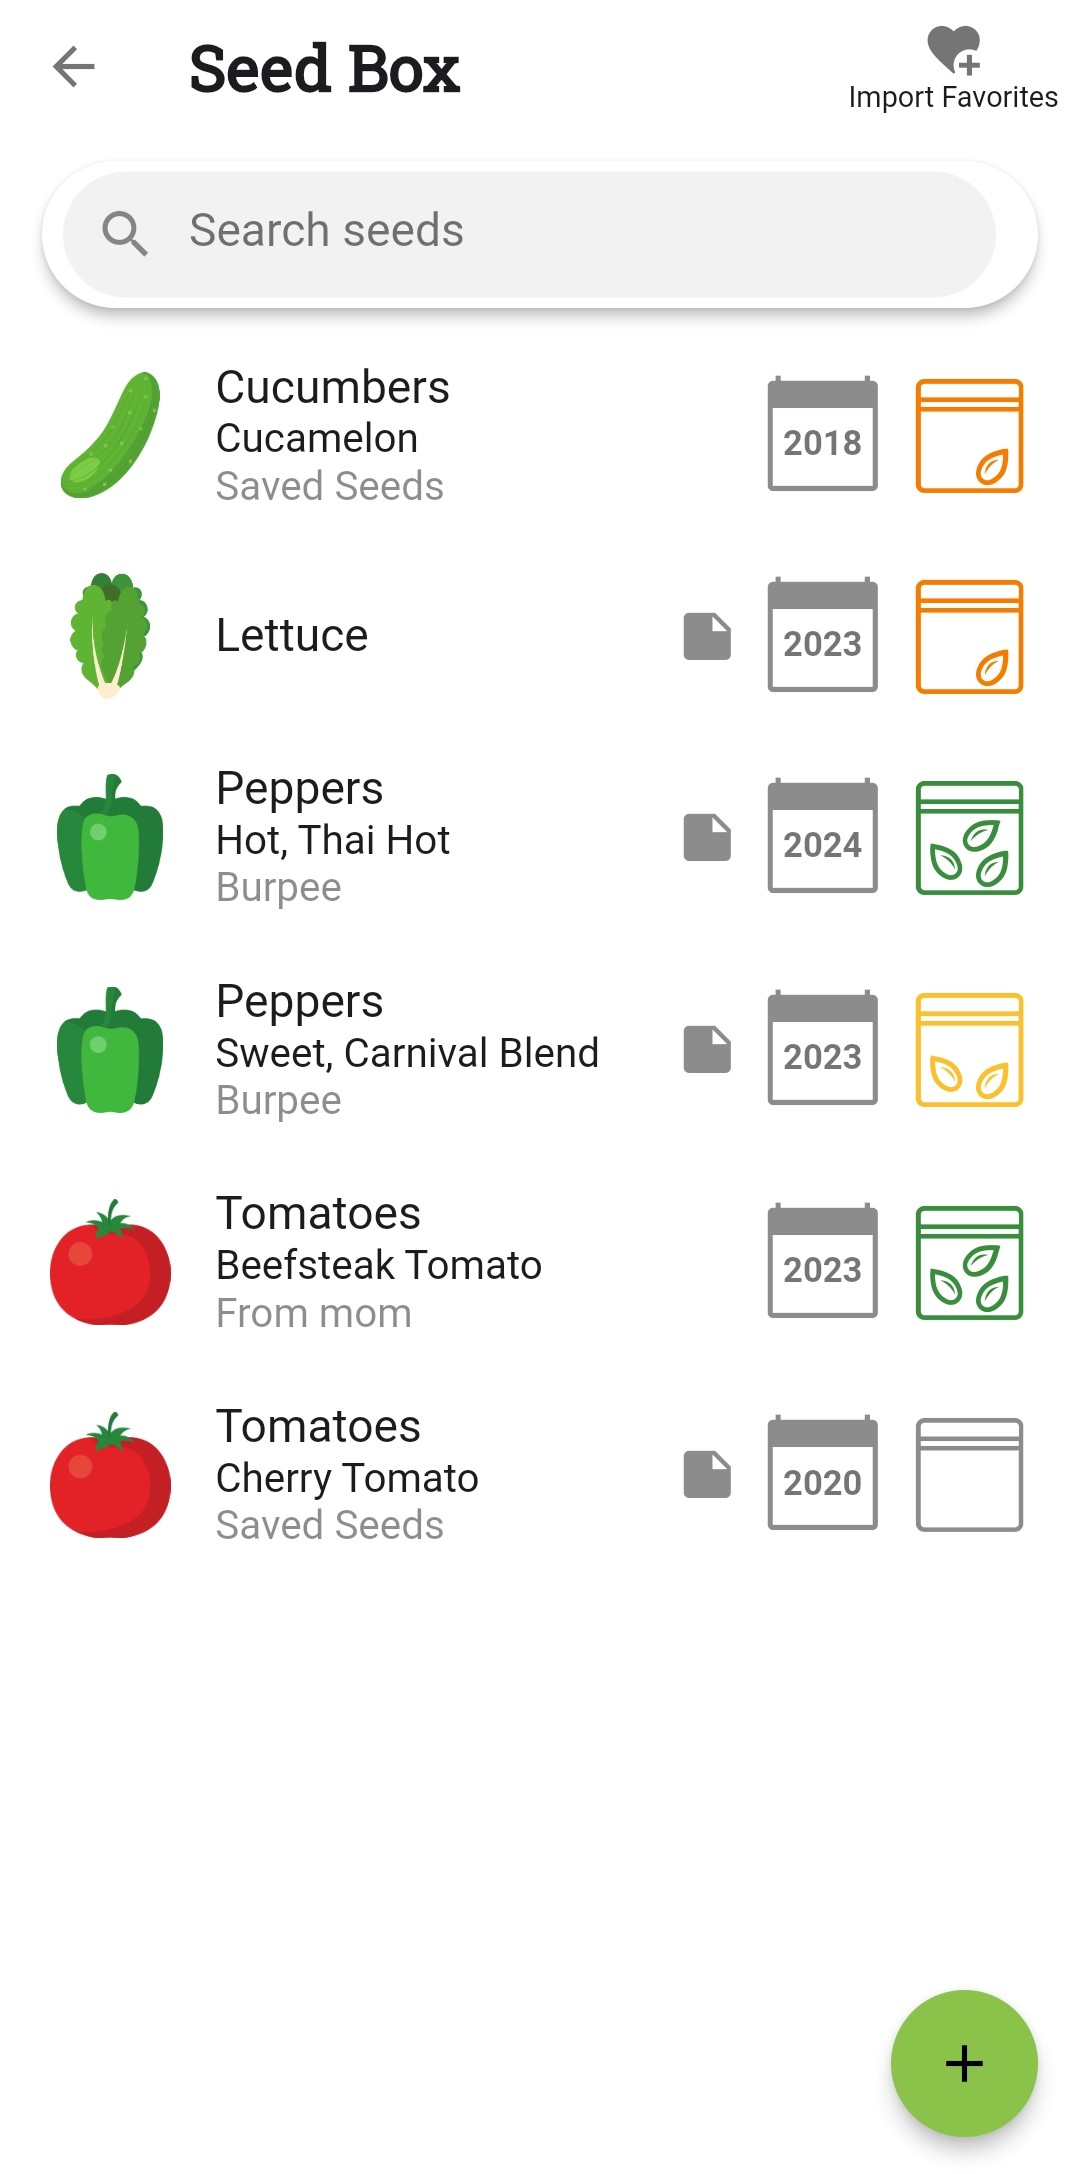 Screenshot of the Seed Box feature in Planter